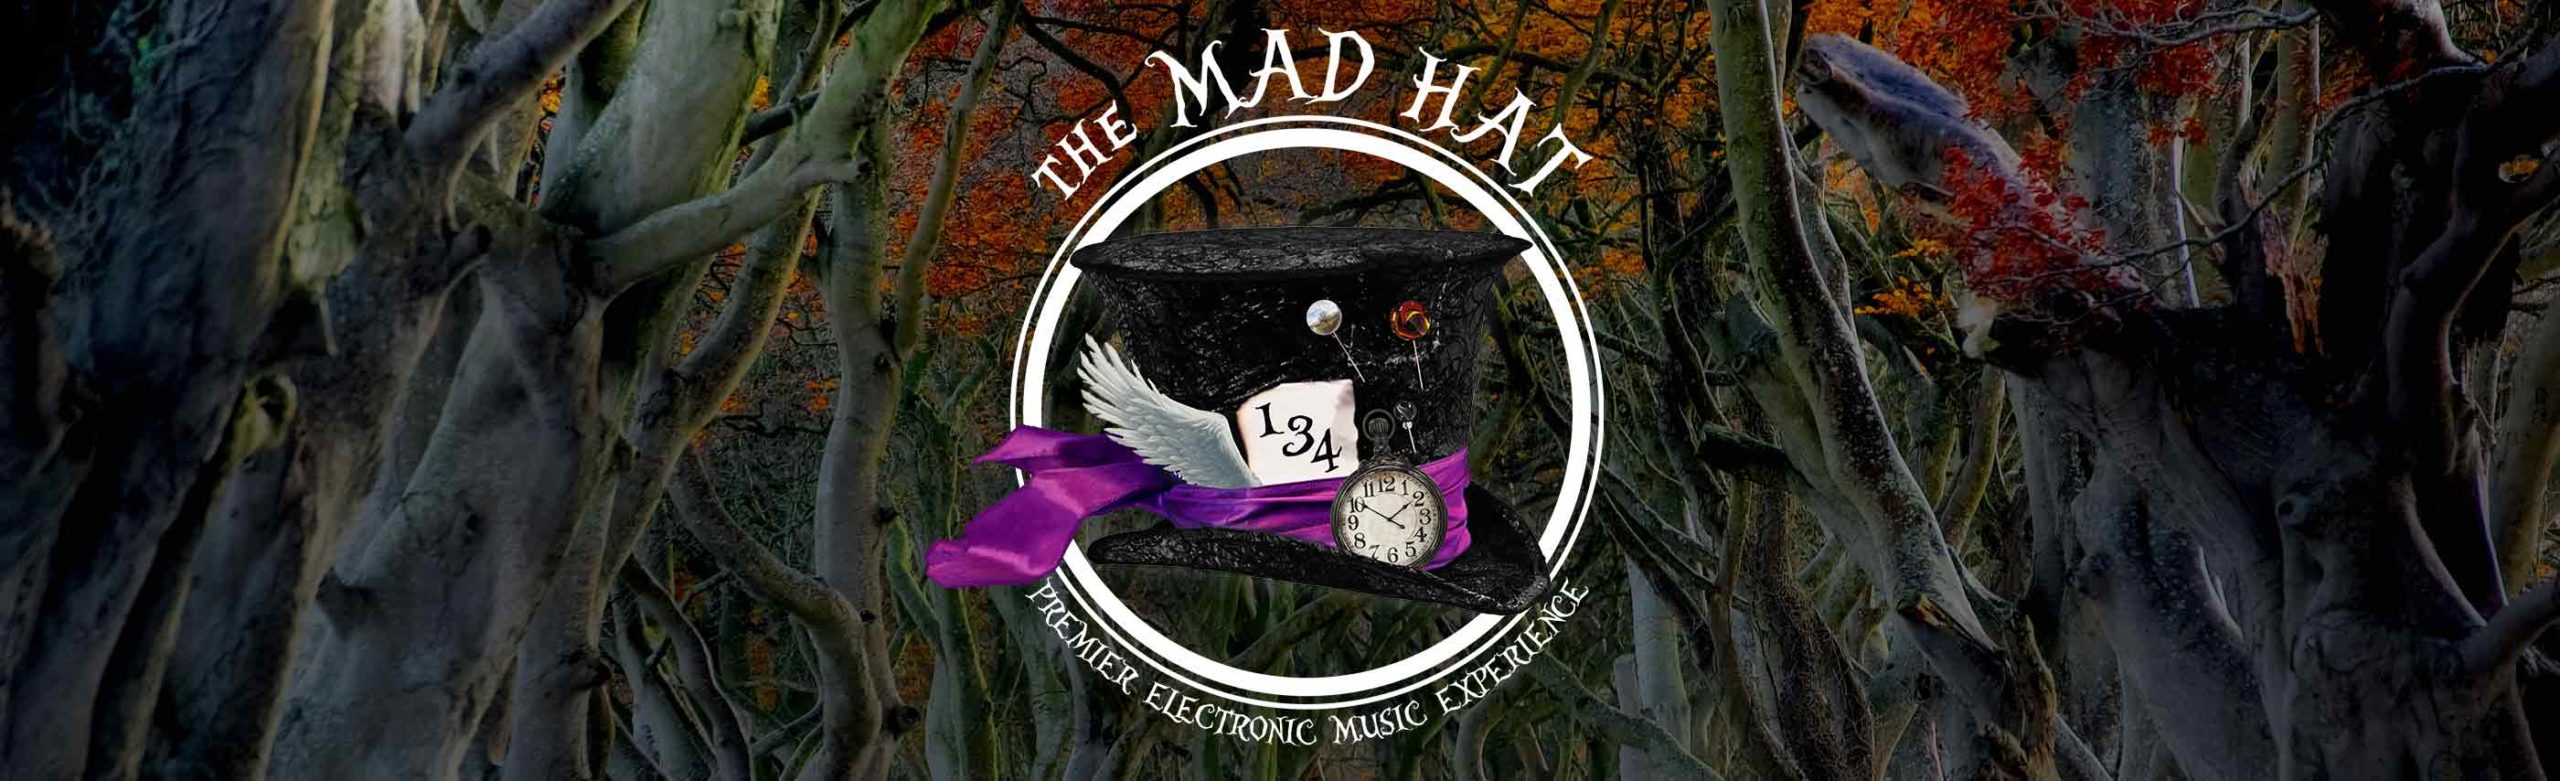 The Mad Hat: Vol. V